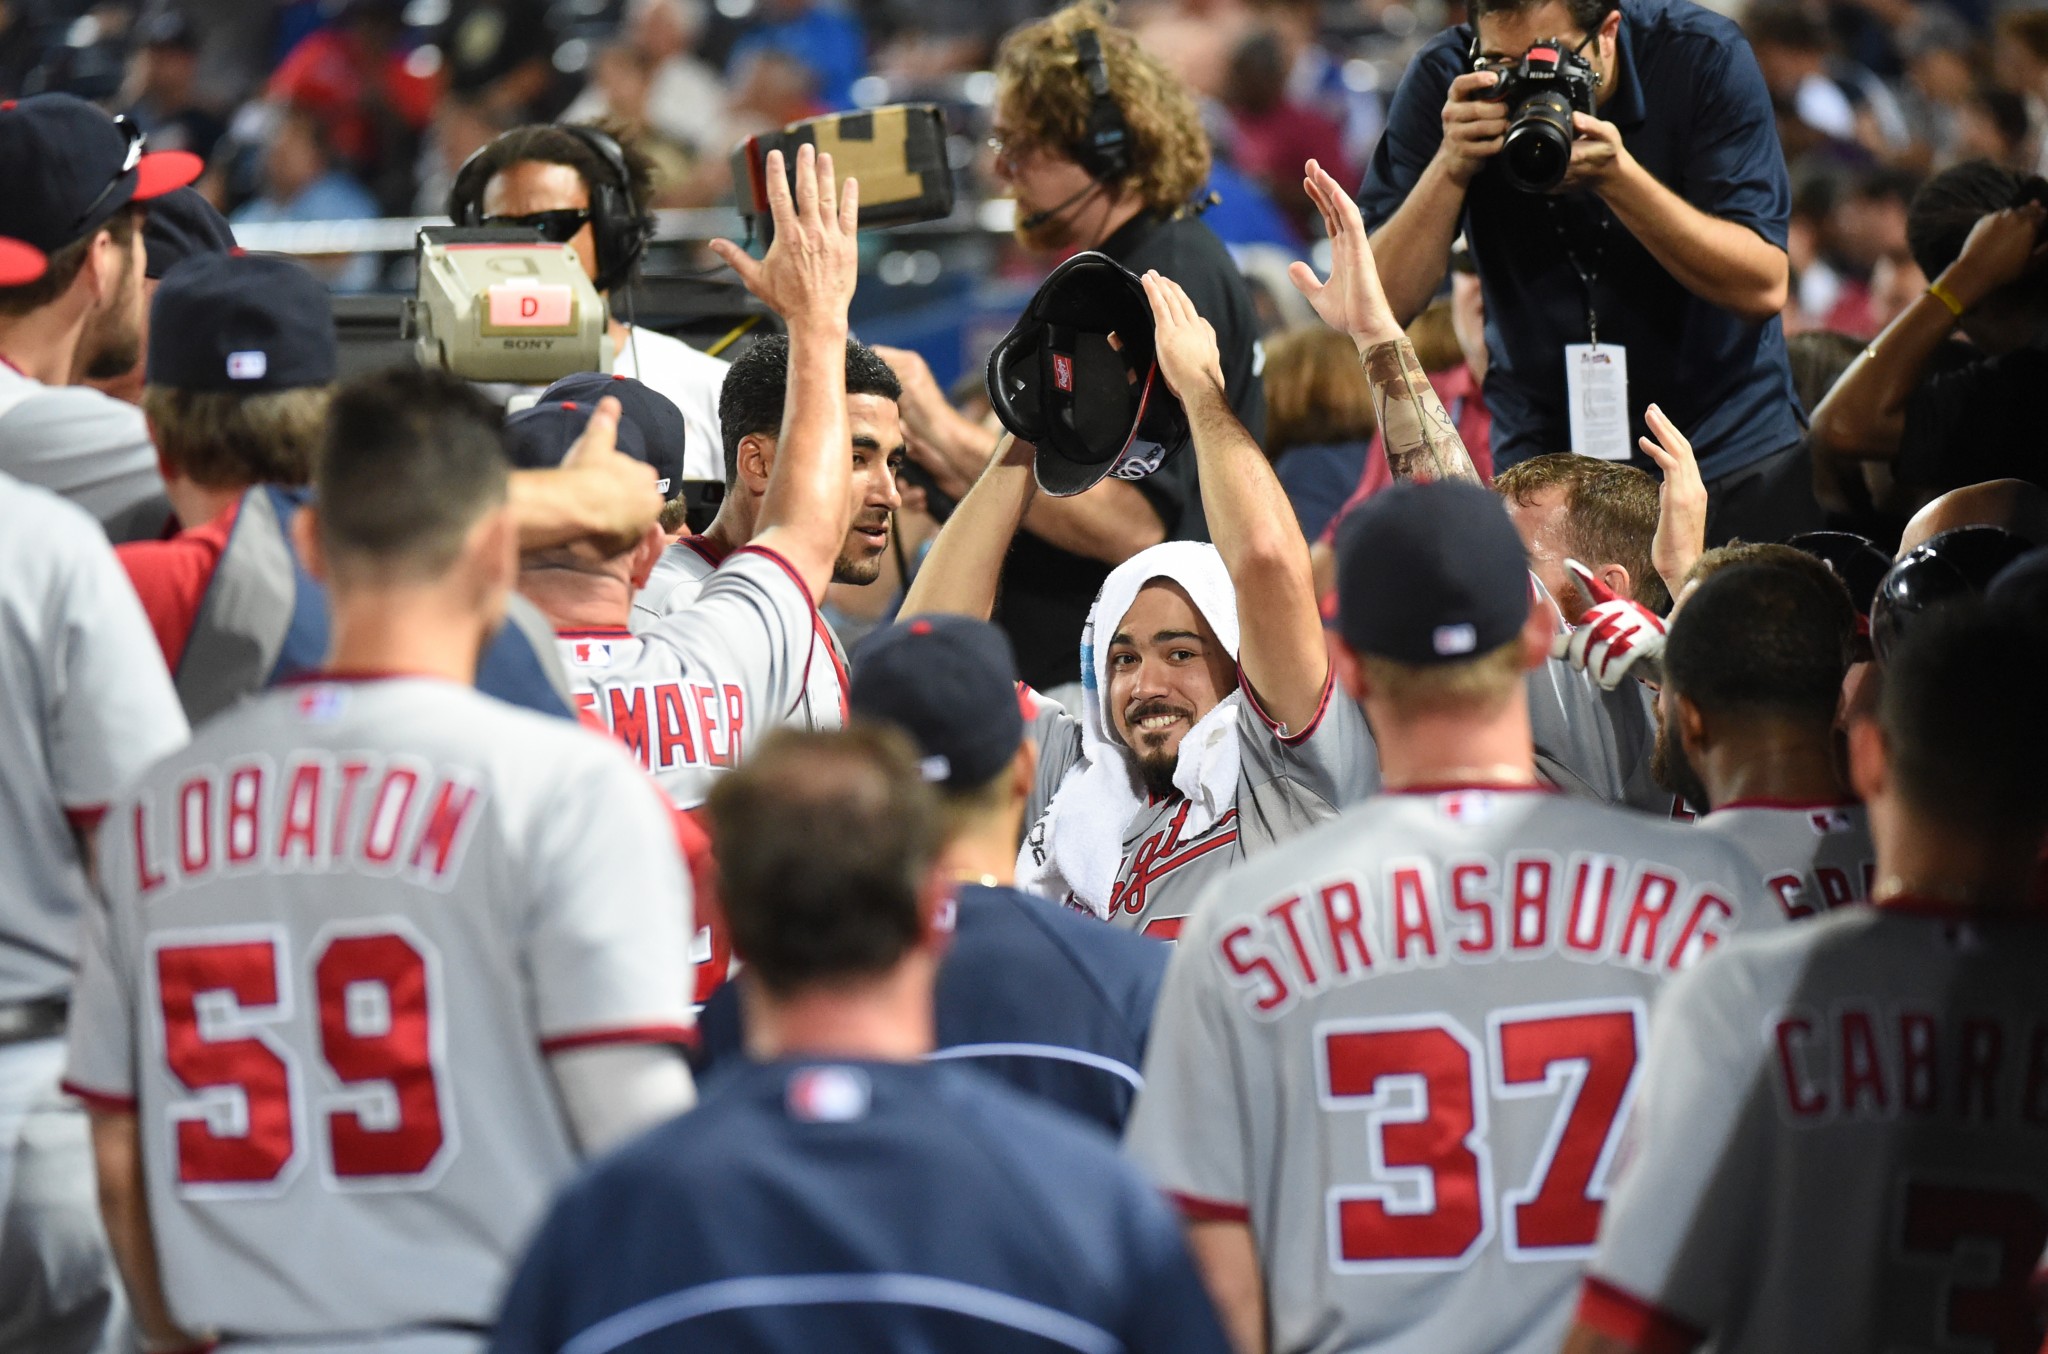 Washington Nationals clinch NL East title with 3-0 victory over the Atlanta Braves